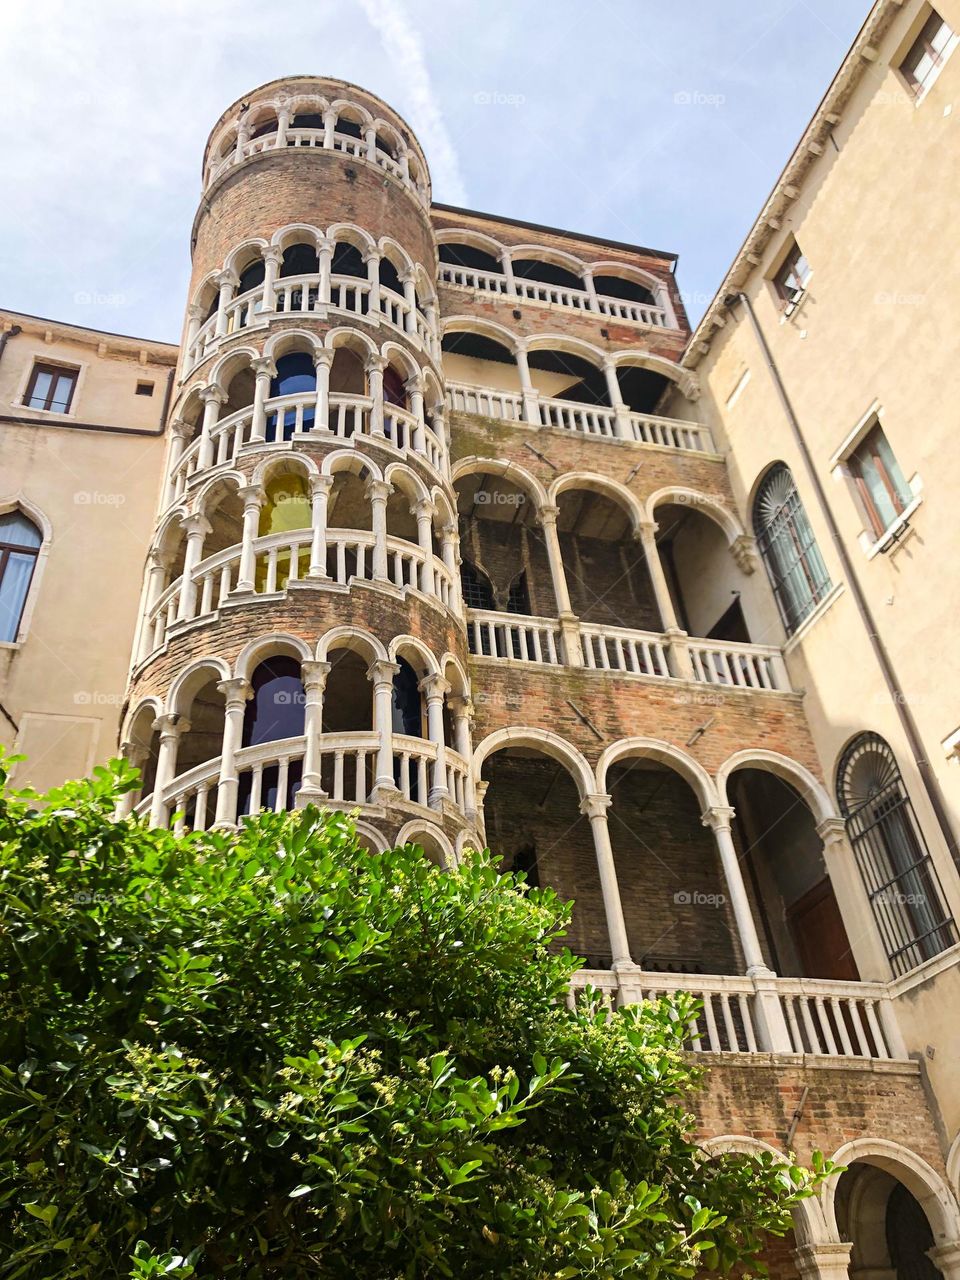 Beautiful building in Venice Italy arches tower